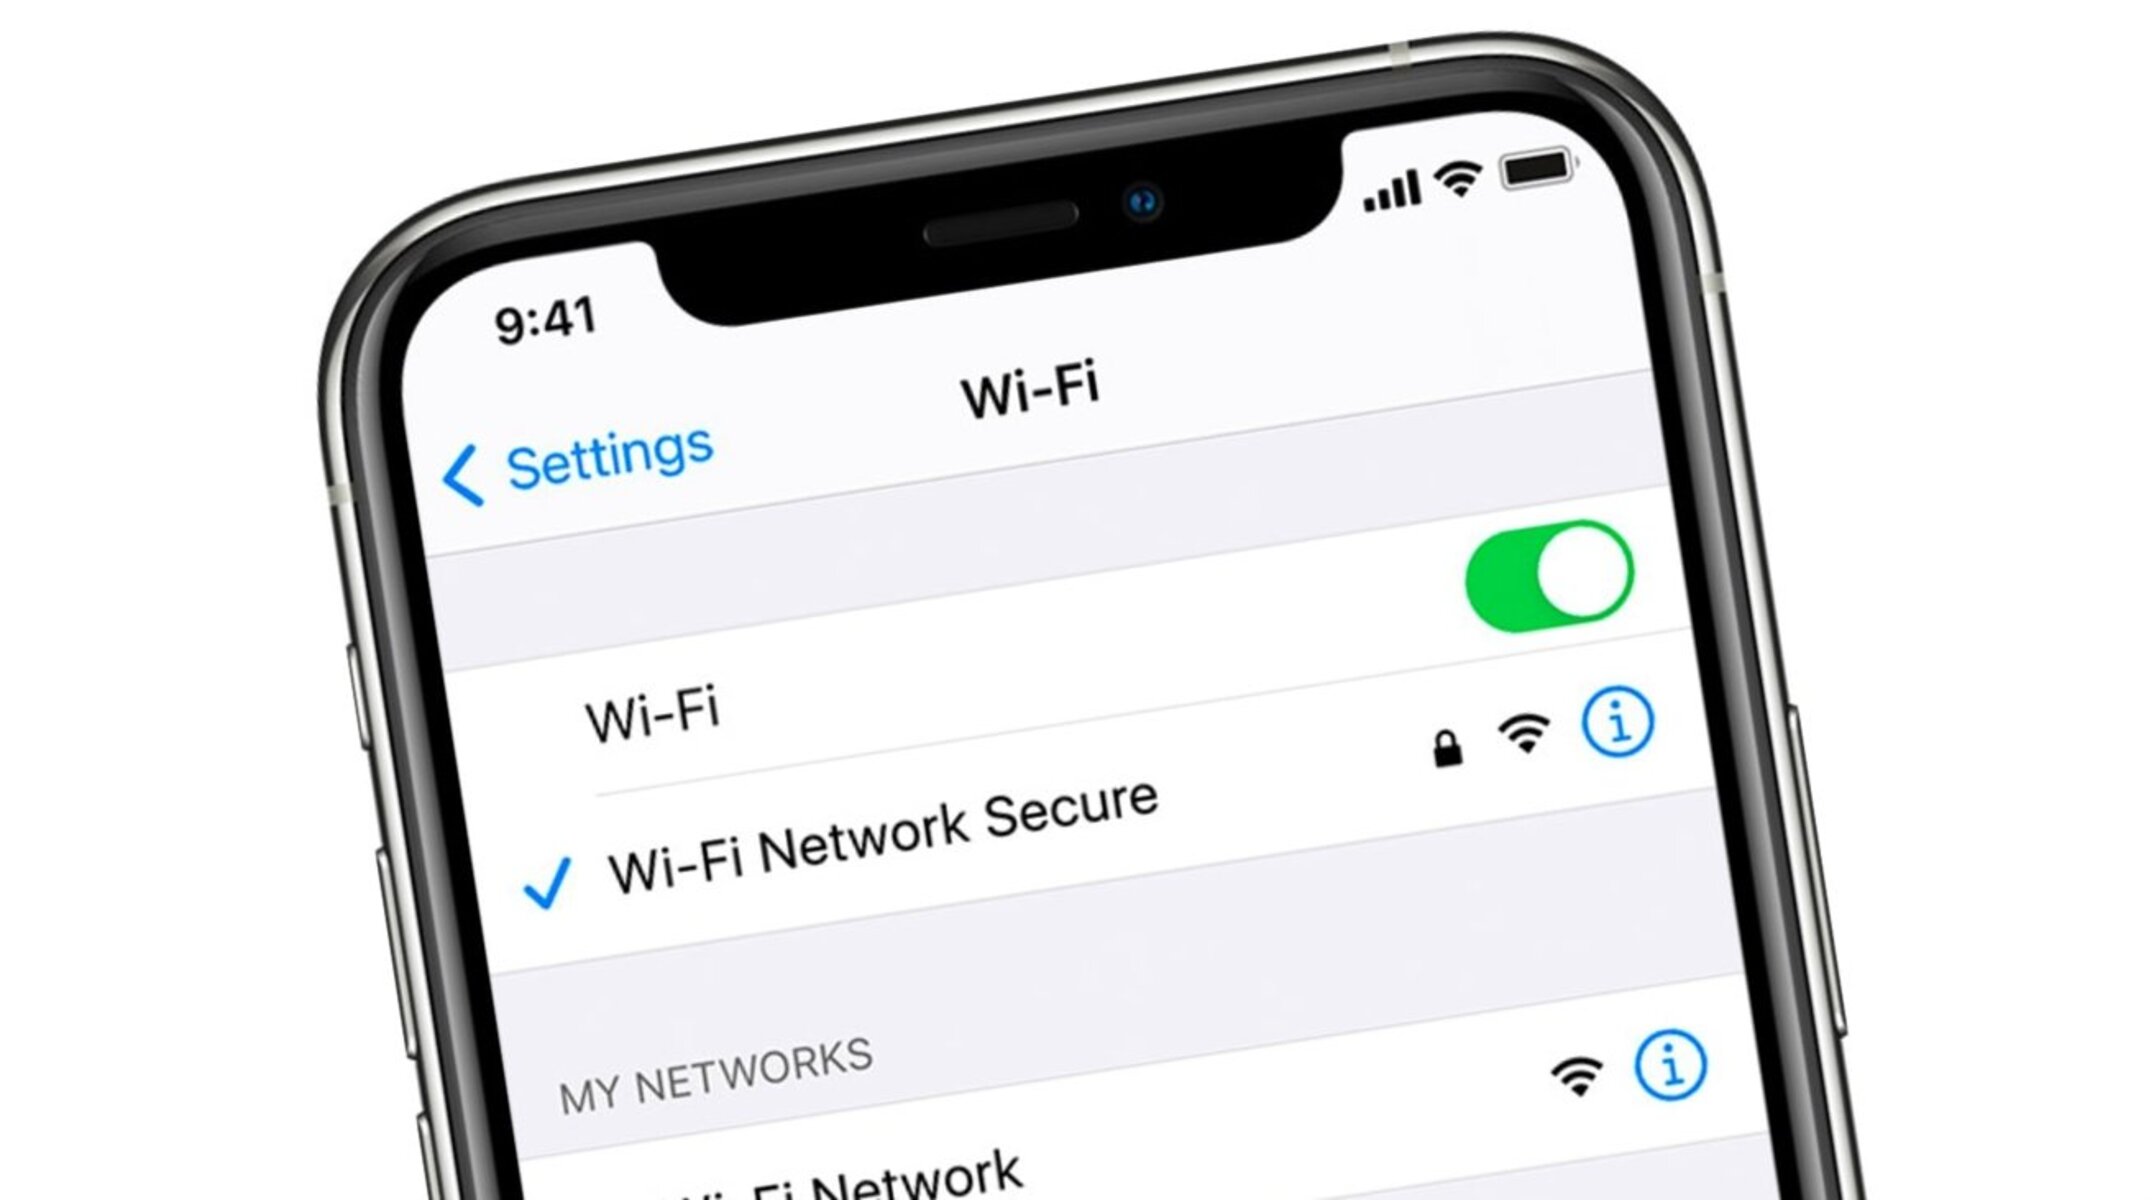 connectivity-cleanup-resetting-network-settings-on-iphone-12